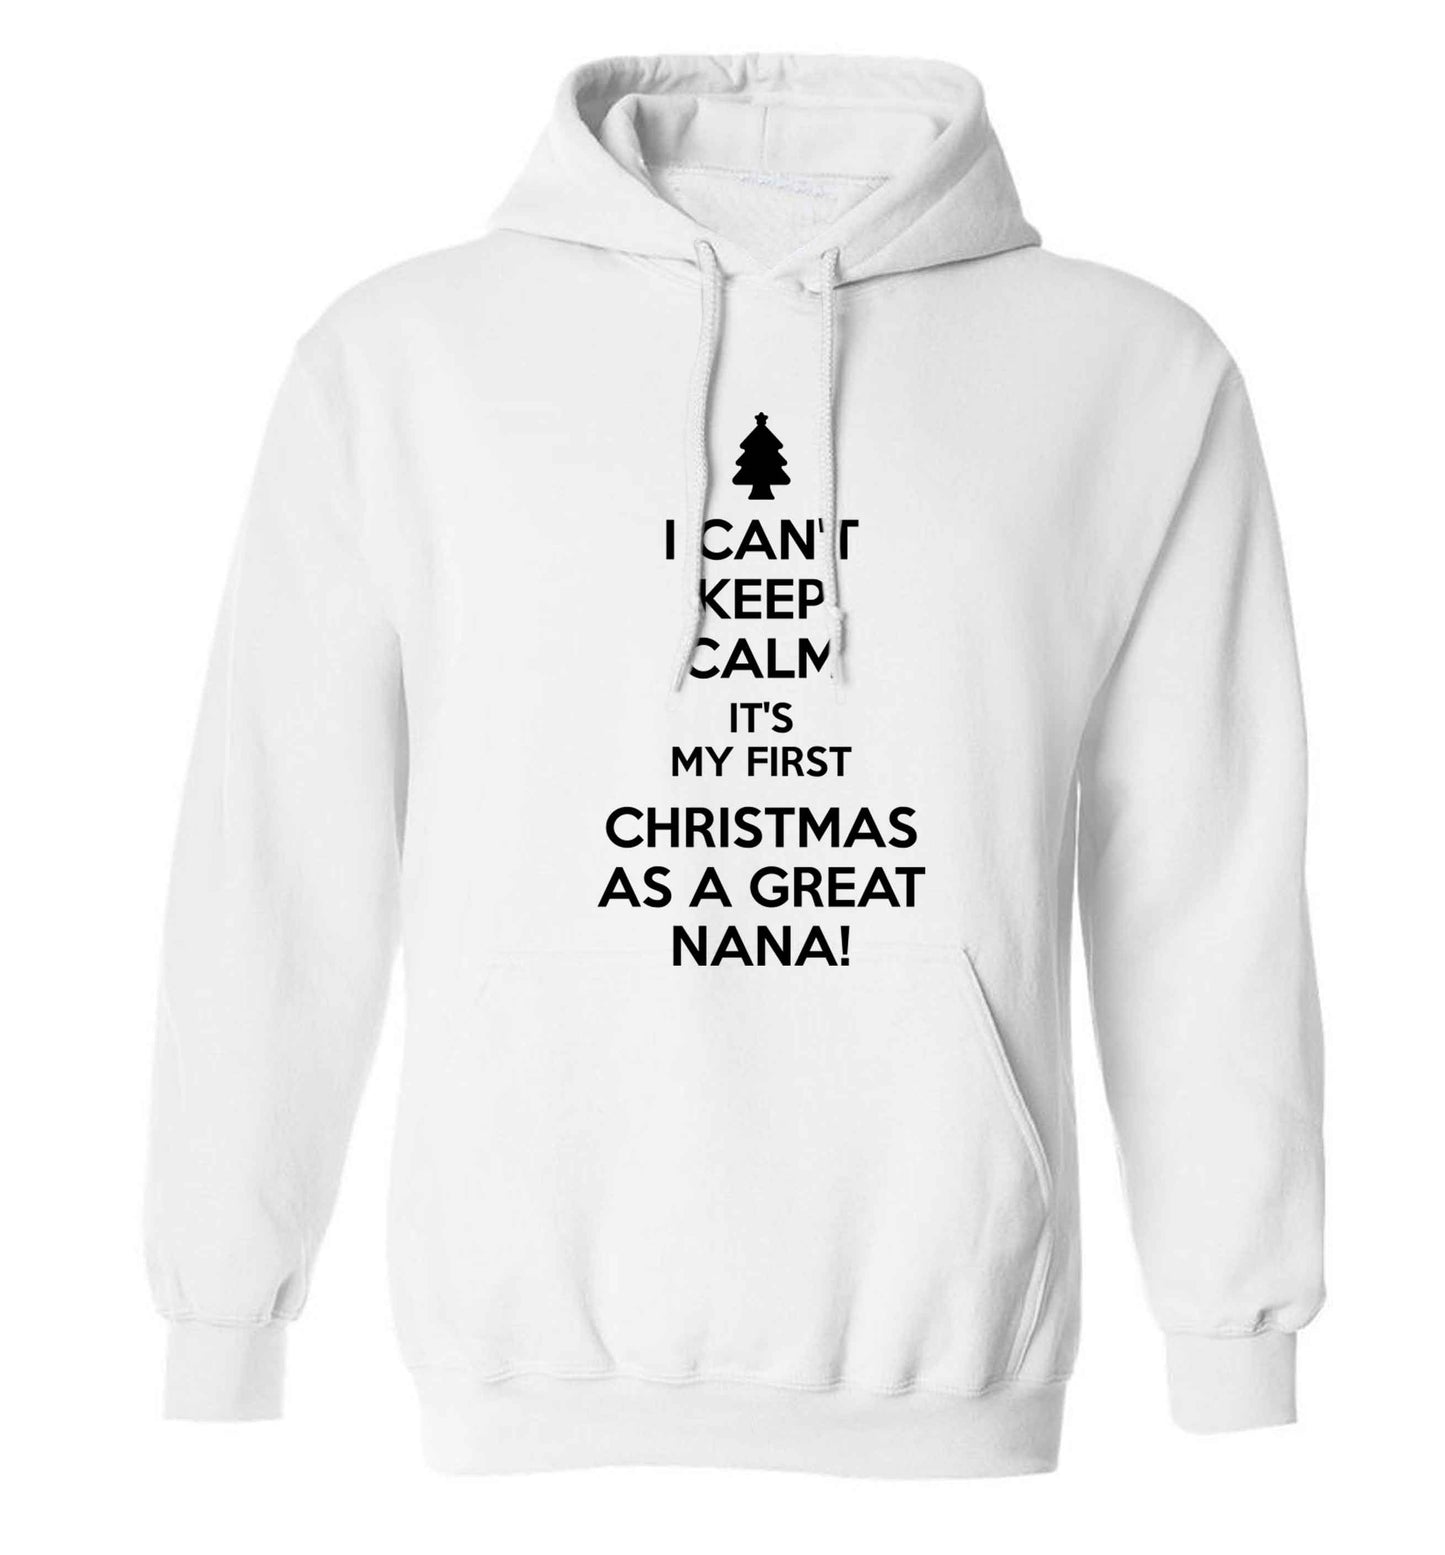 I can't keep calm it's my first Christmas as a great nana! adults unisex white hoodie 2XL